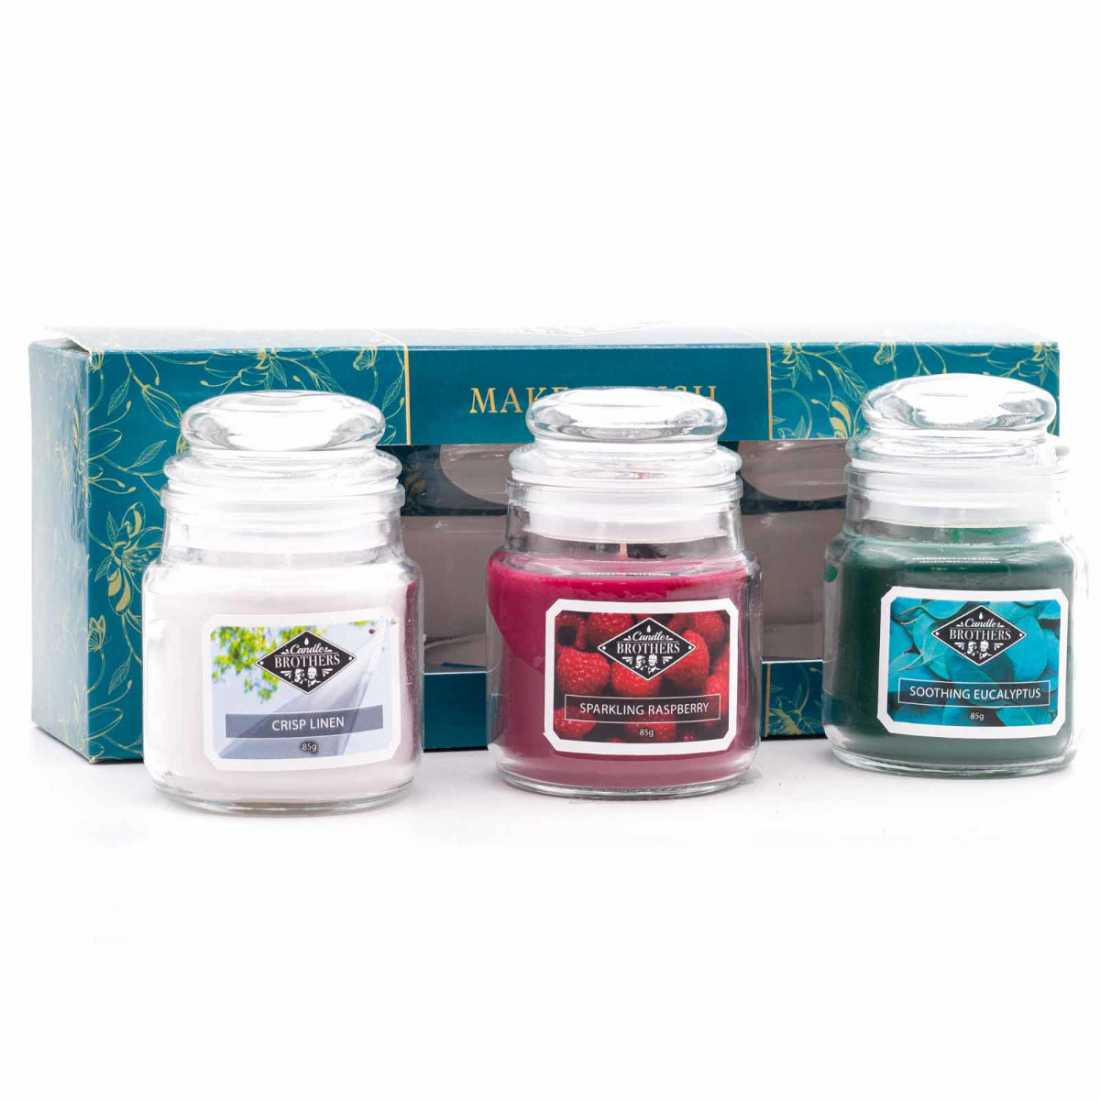 'Make a Wish' Scented Candle - 85 g, 3 Pieces